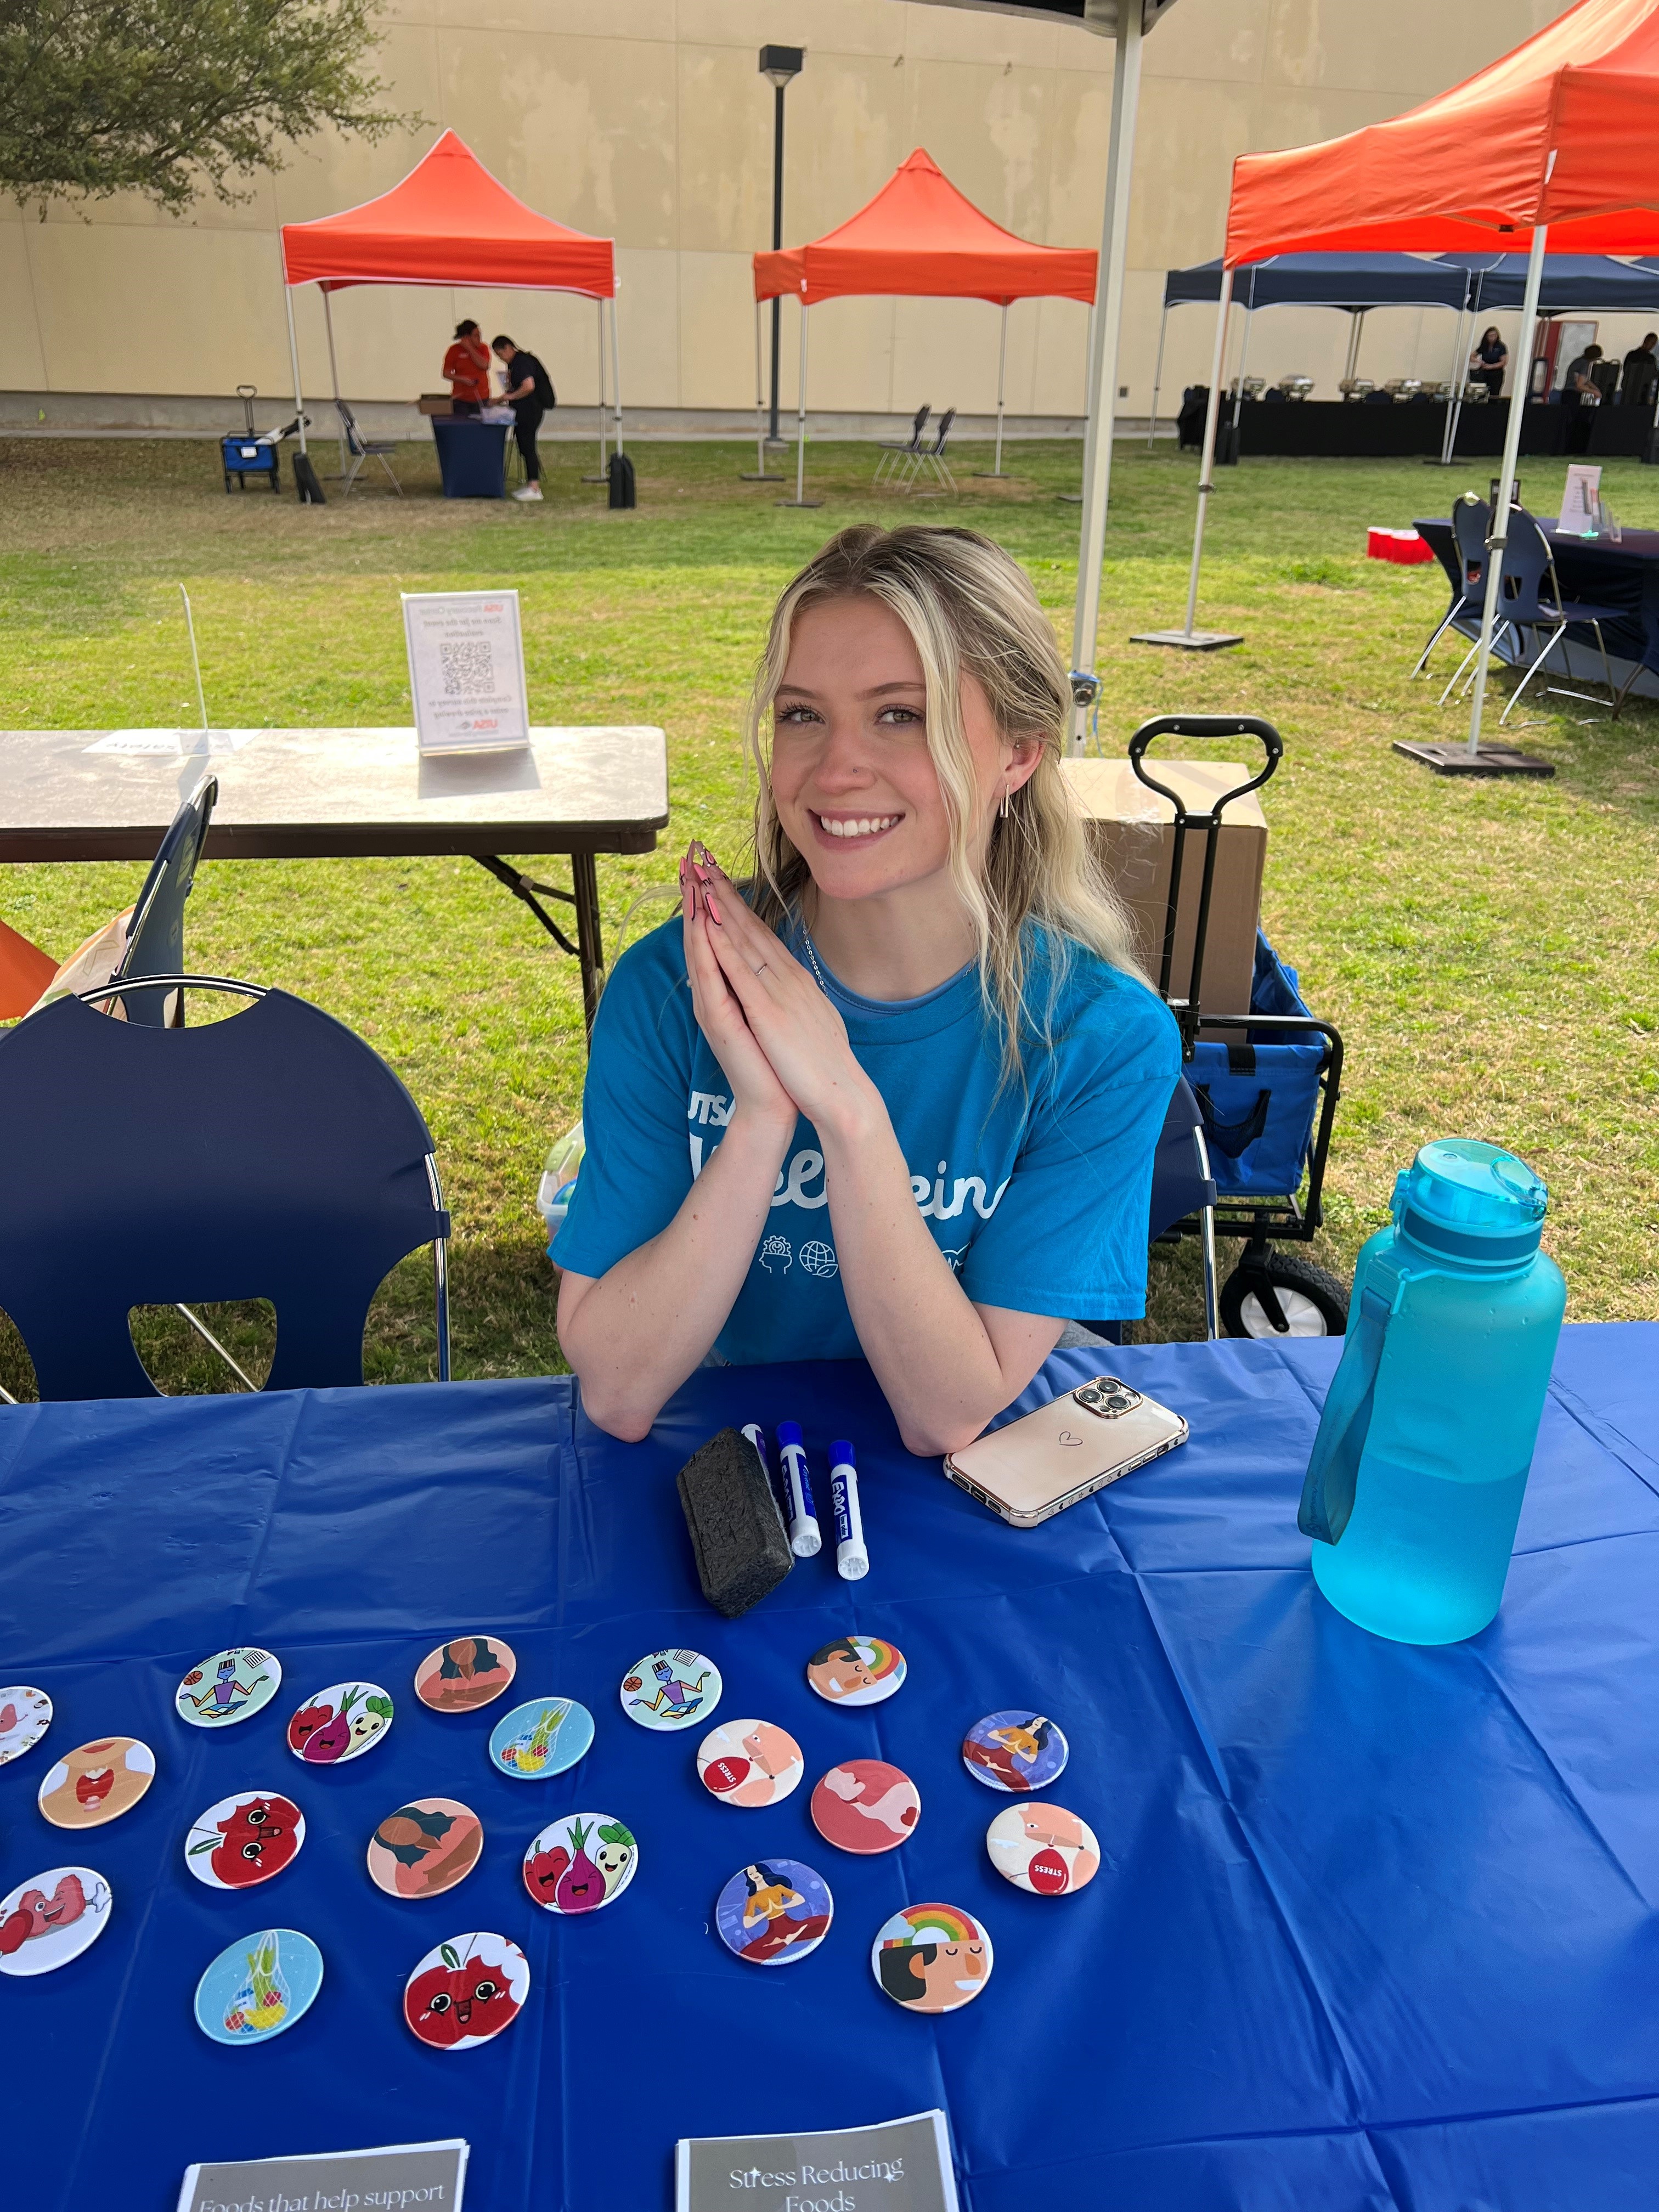 UTSA Student Tabling with Buttons on table, wearing a blue Wellbeing shirt